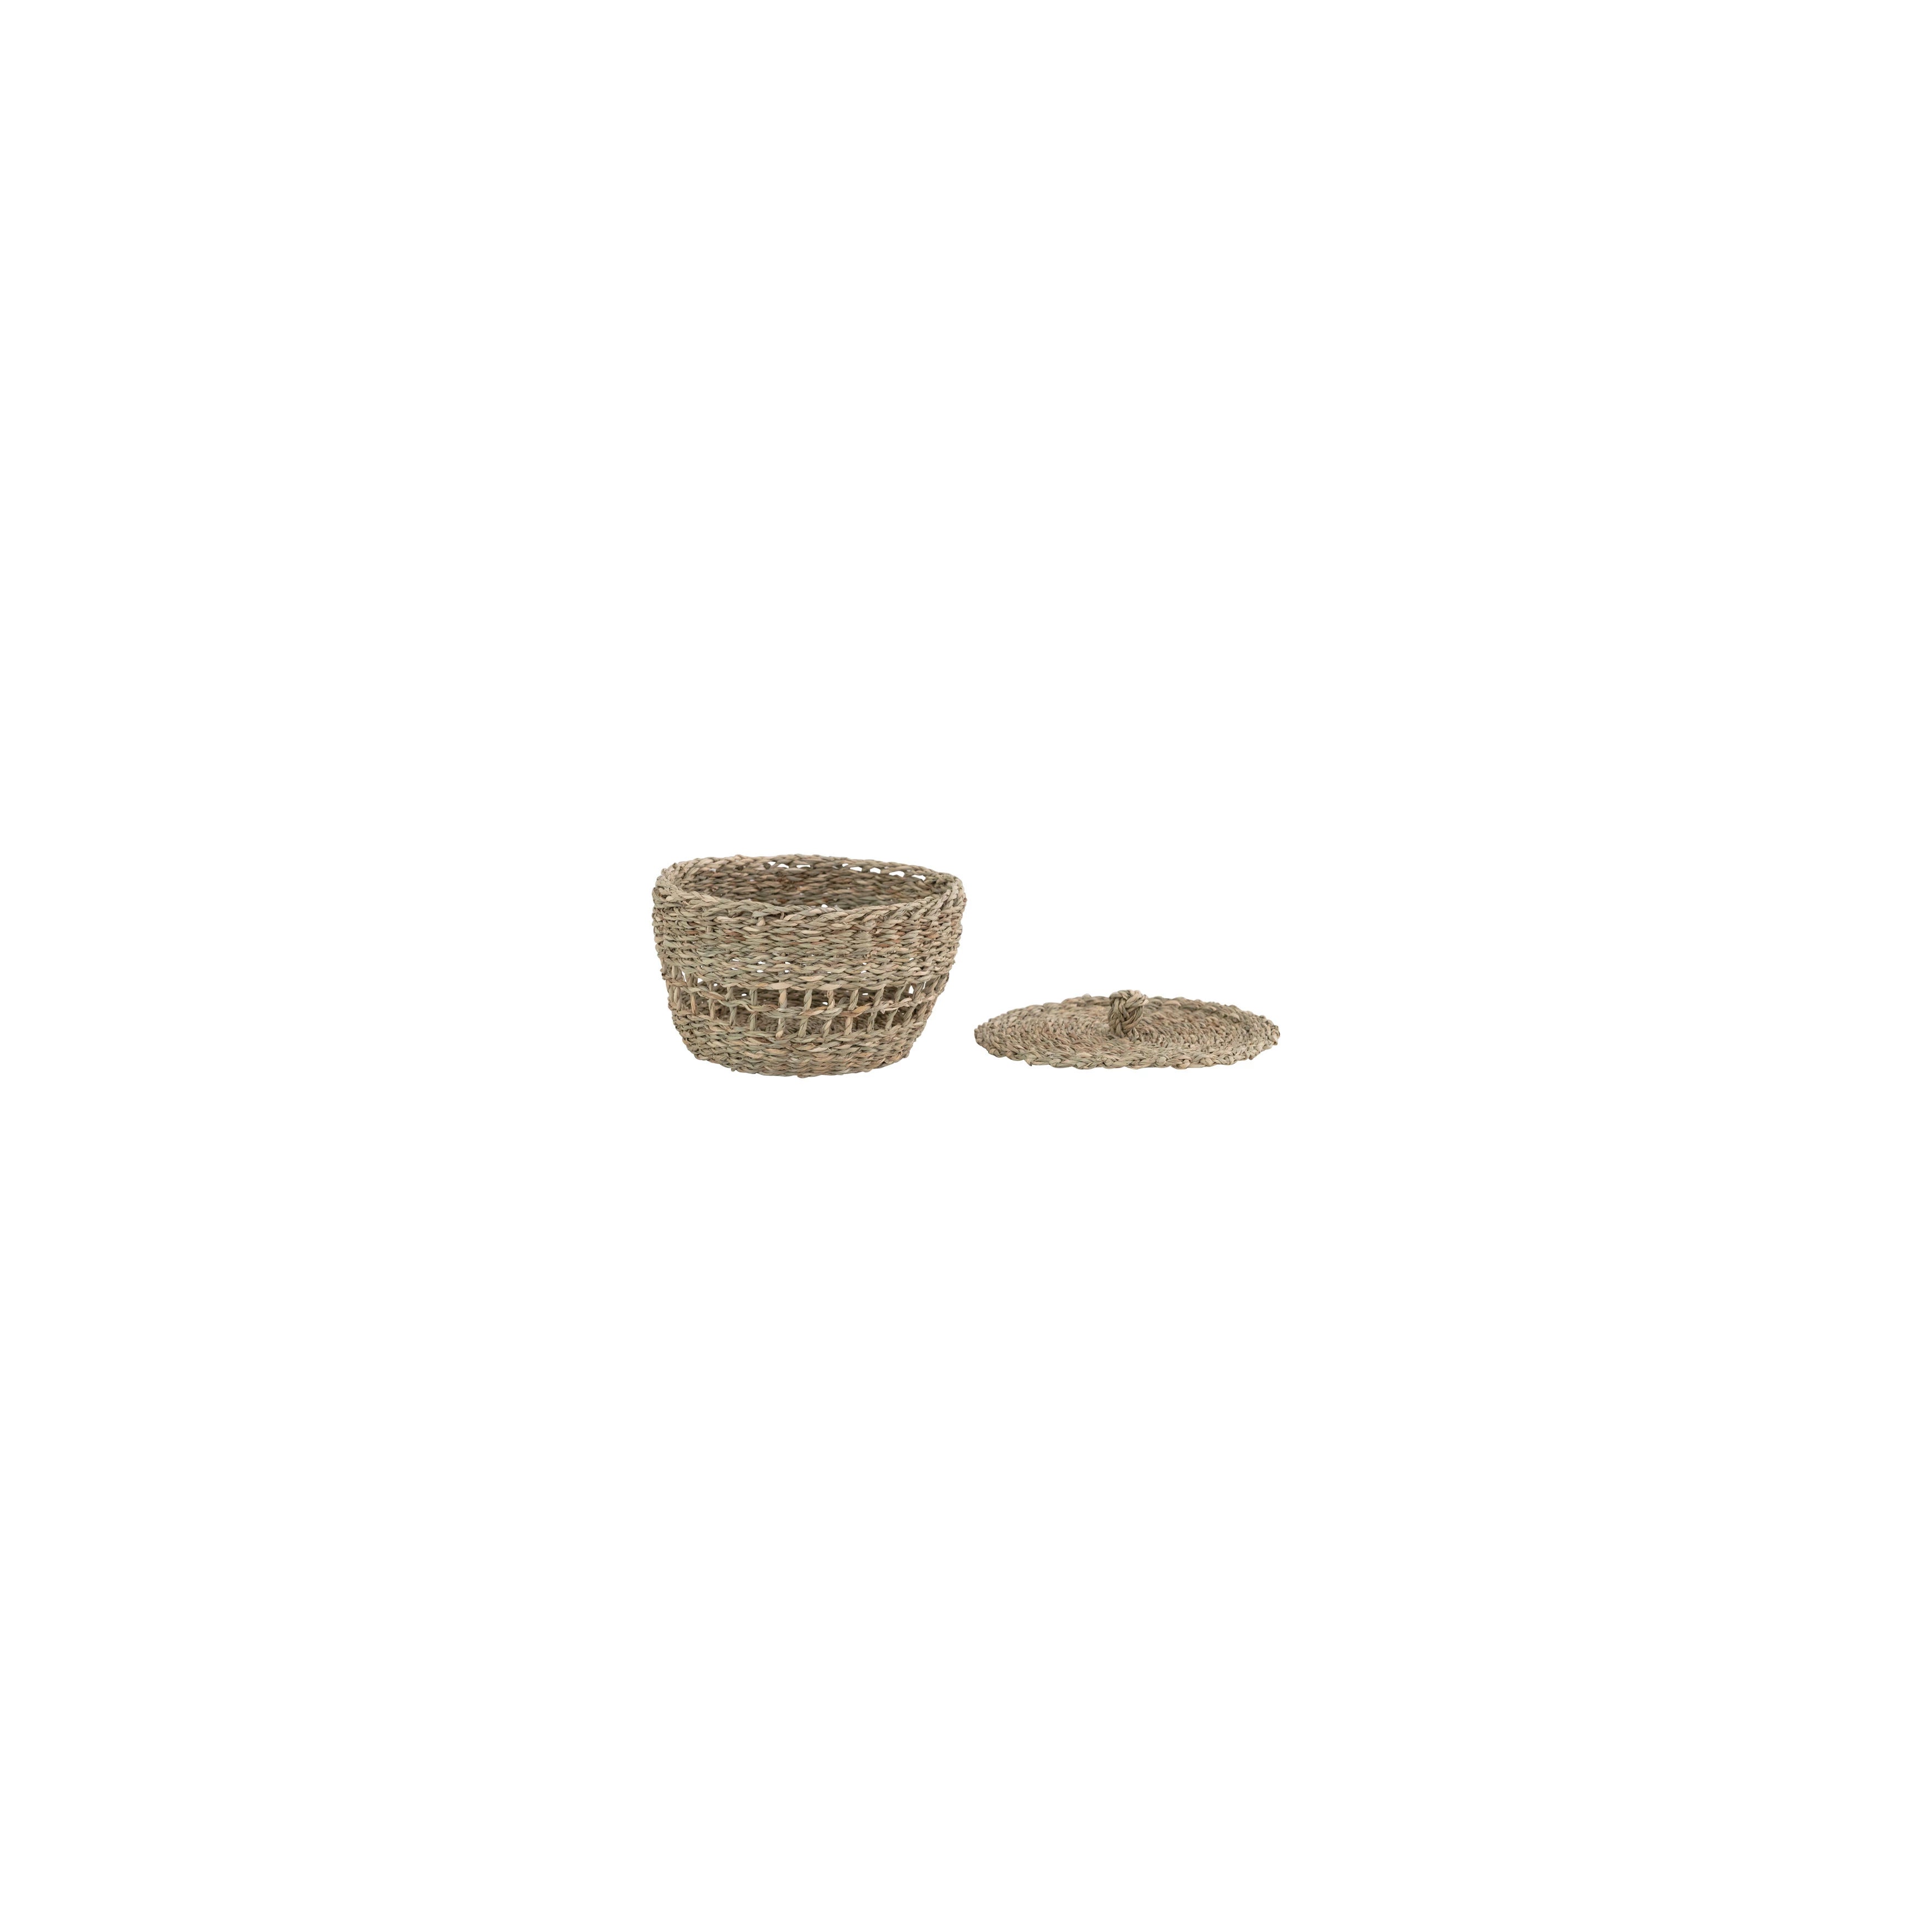 Hand-Woven Seagrass Basket with Lid